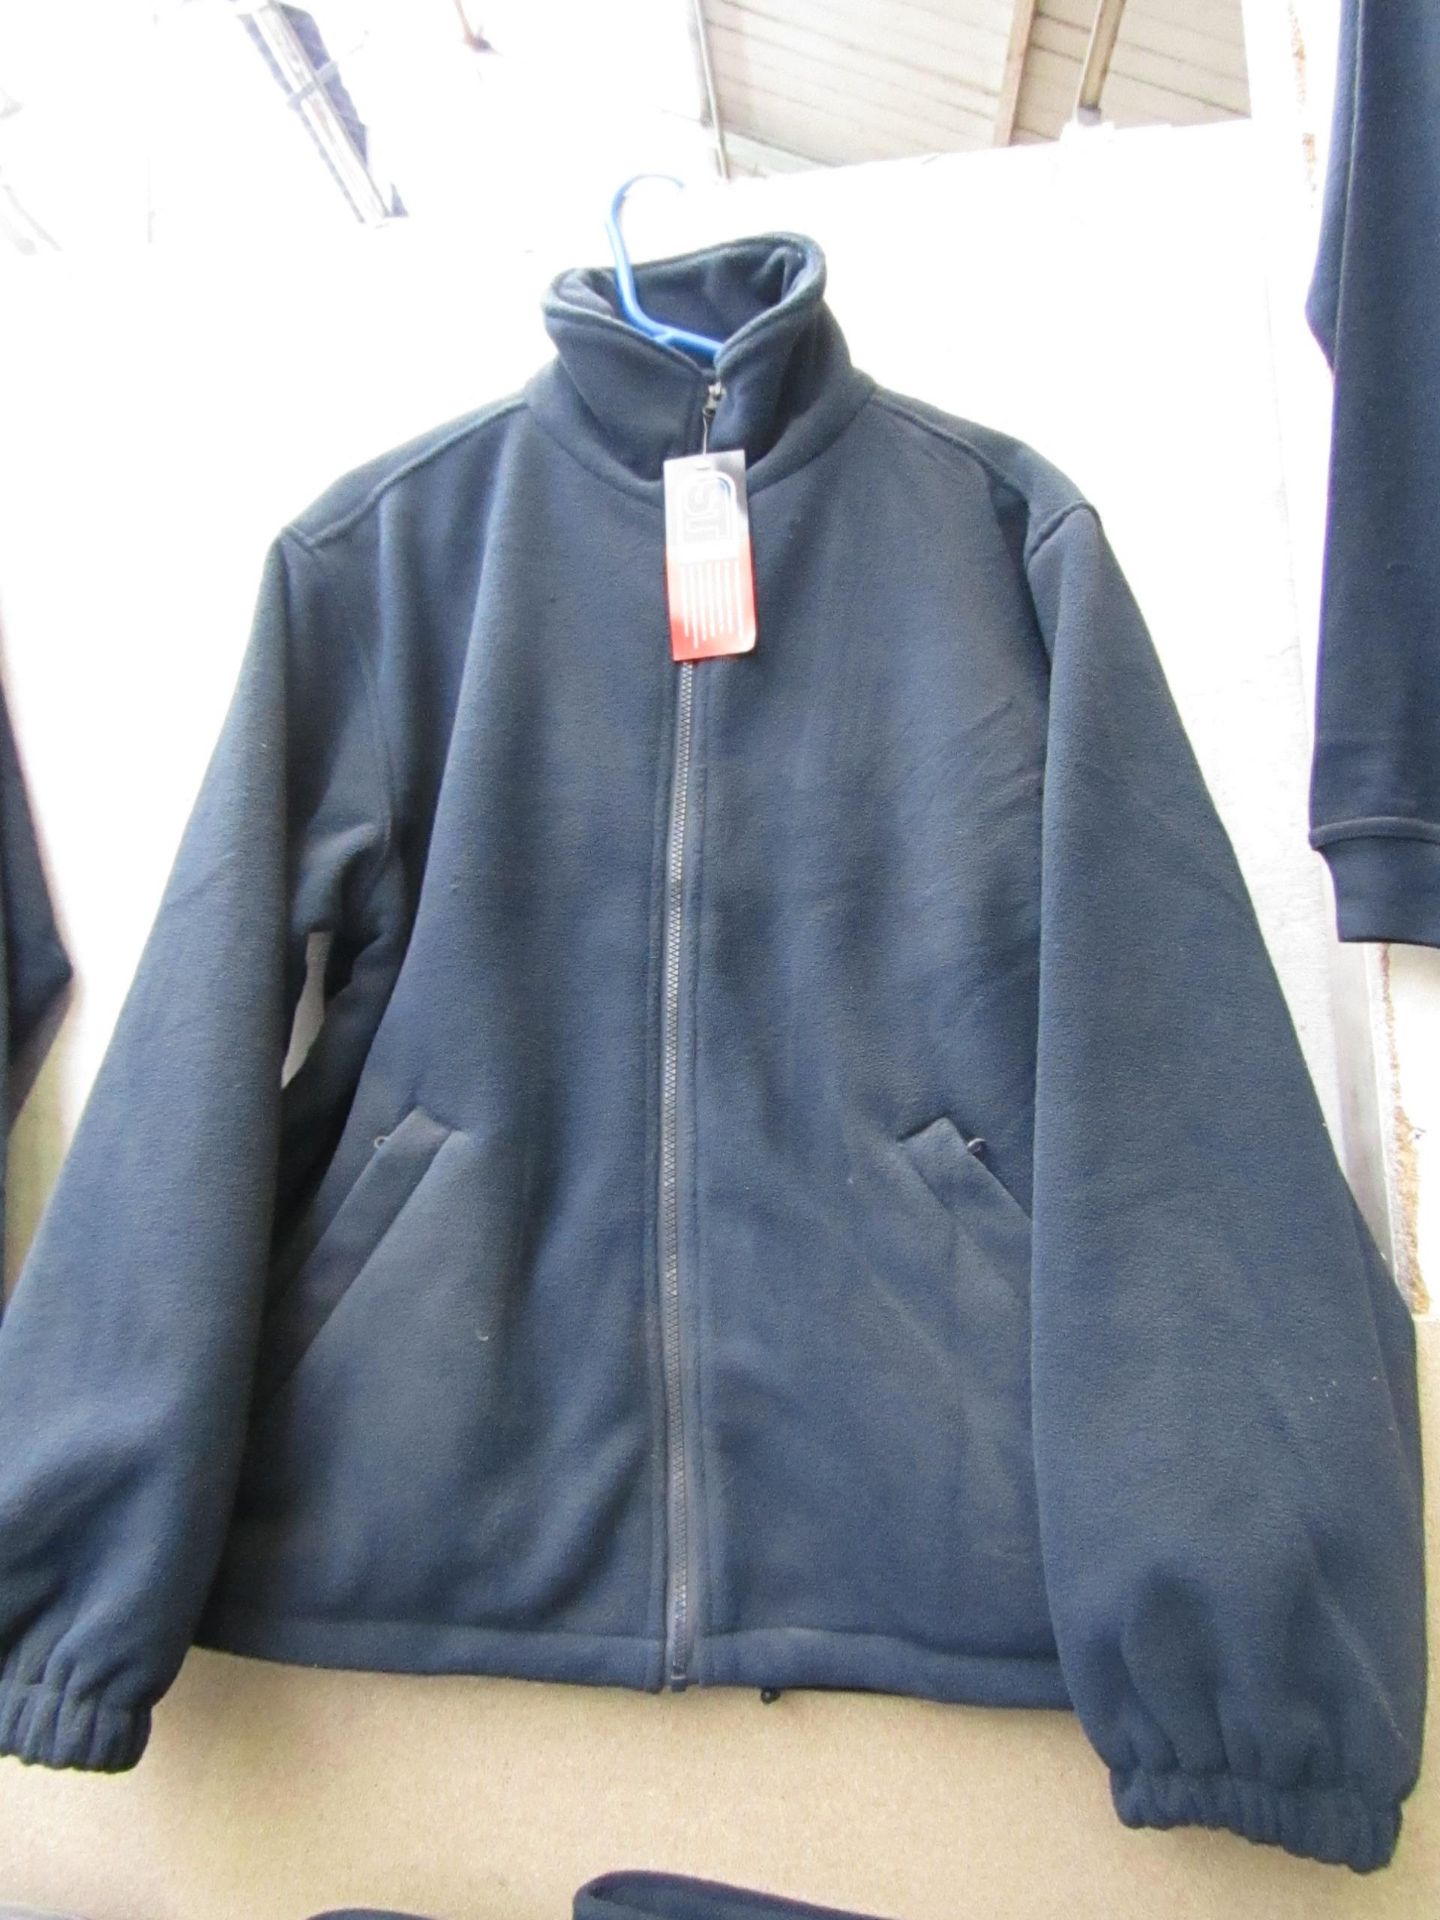 Super Touch Workwear Fleece Size S. New with tags